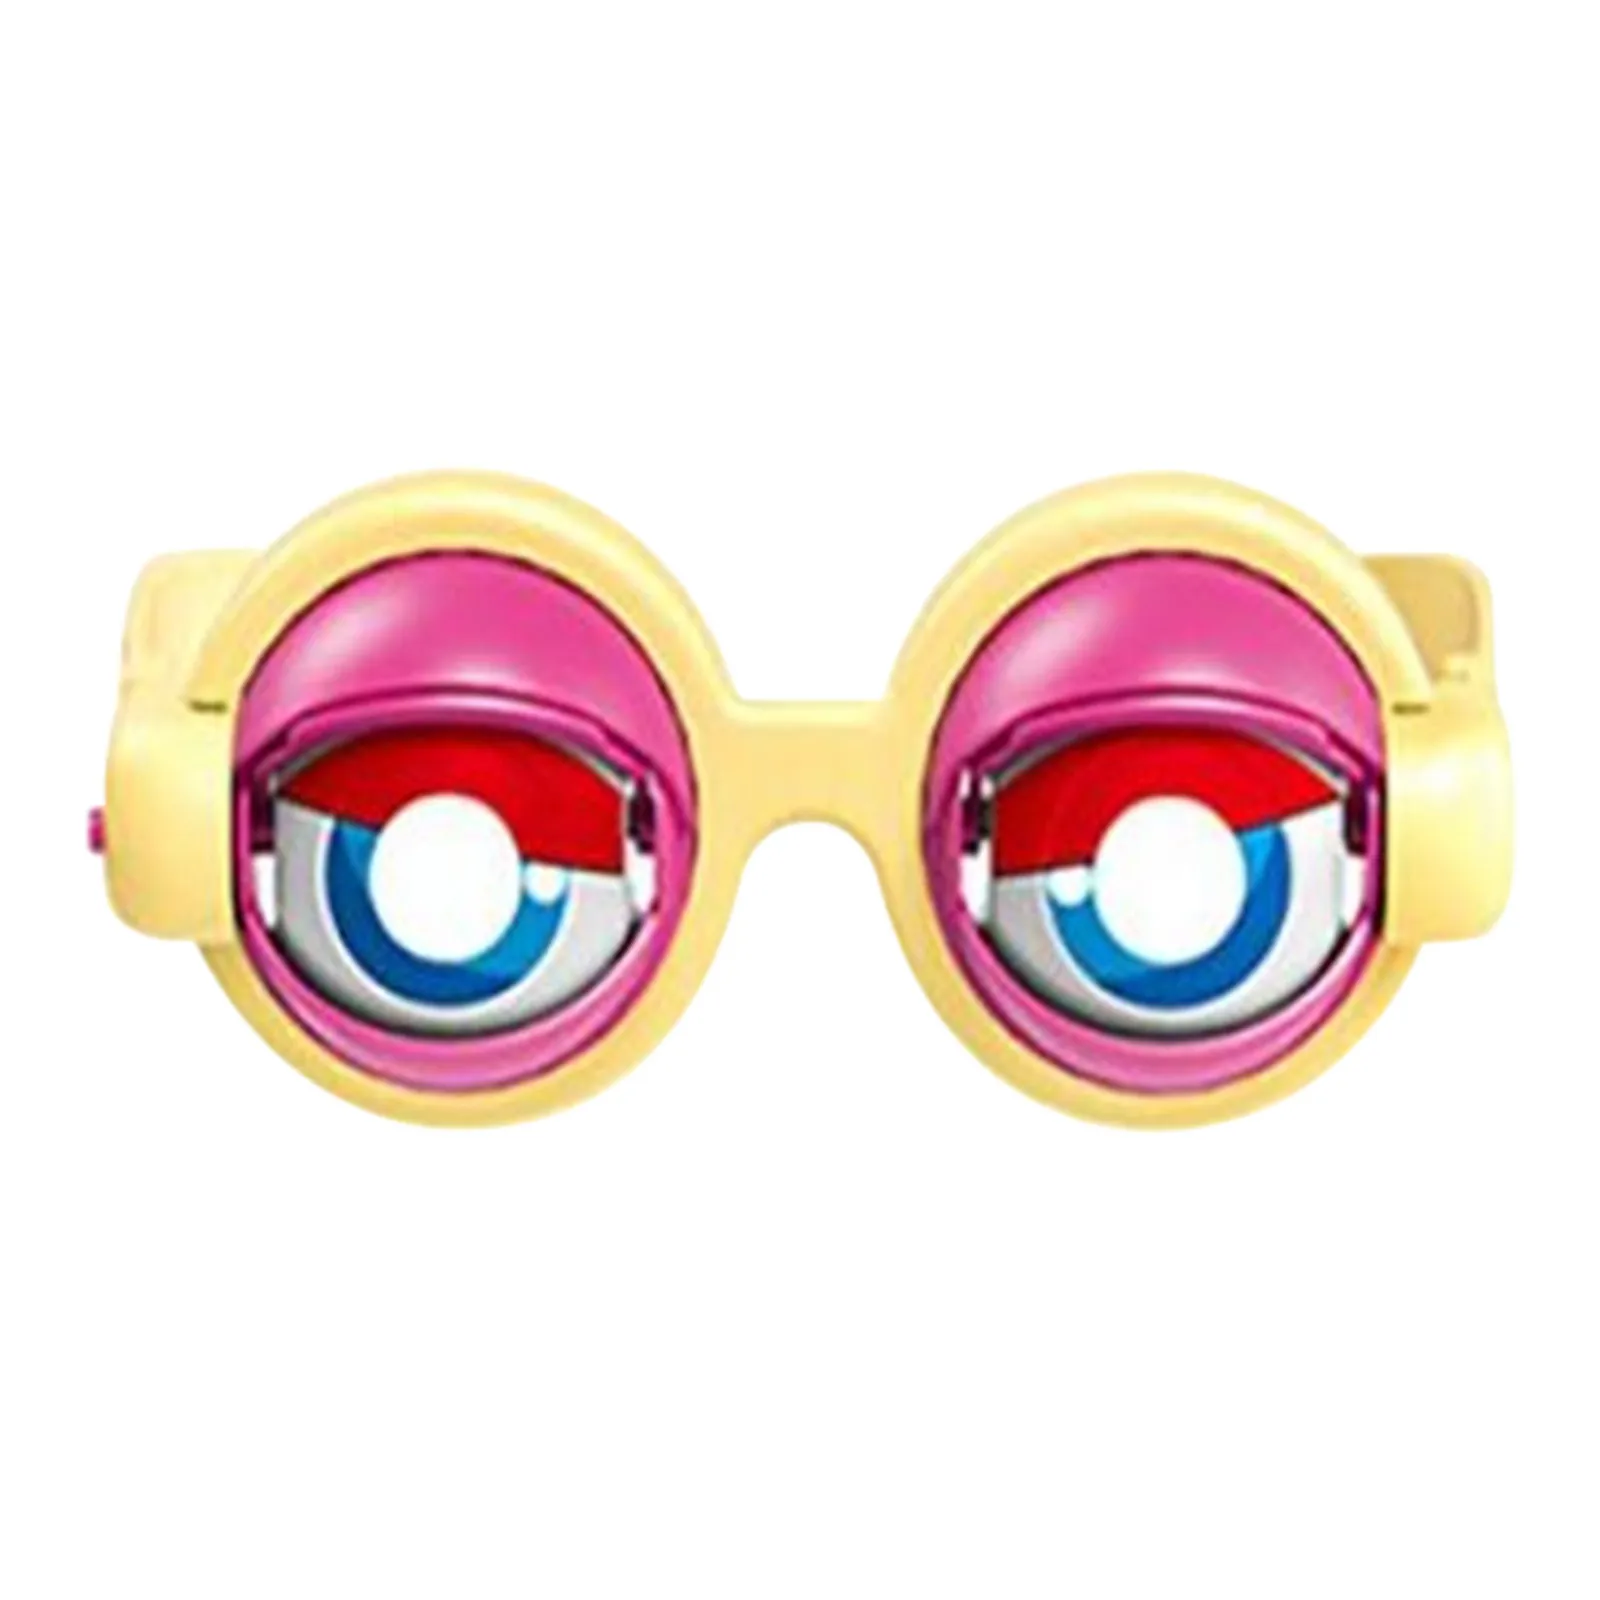 Details about   Crazy Eyes Children Party Funny Prank Glasses Creative Novelty Glasses Toys C#P5